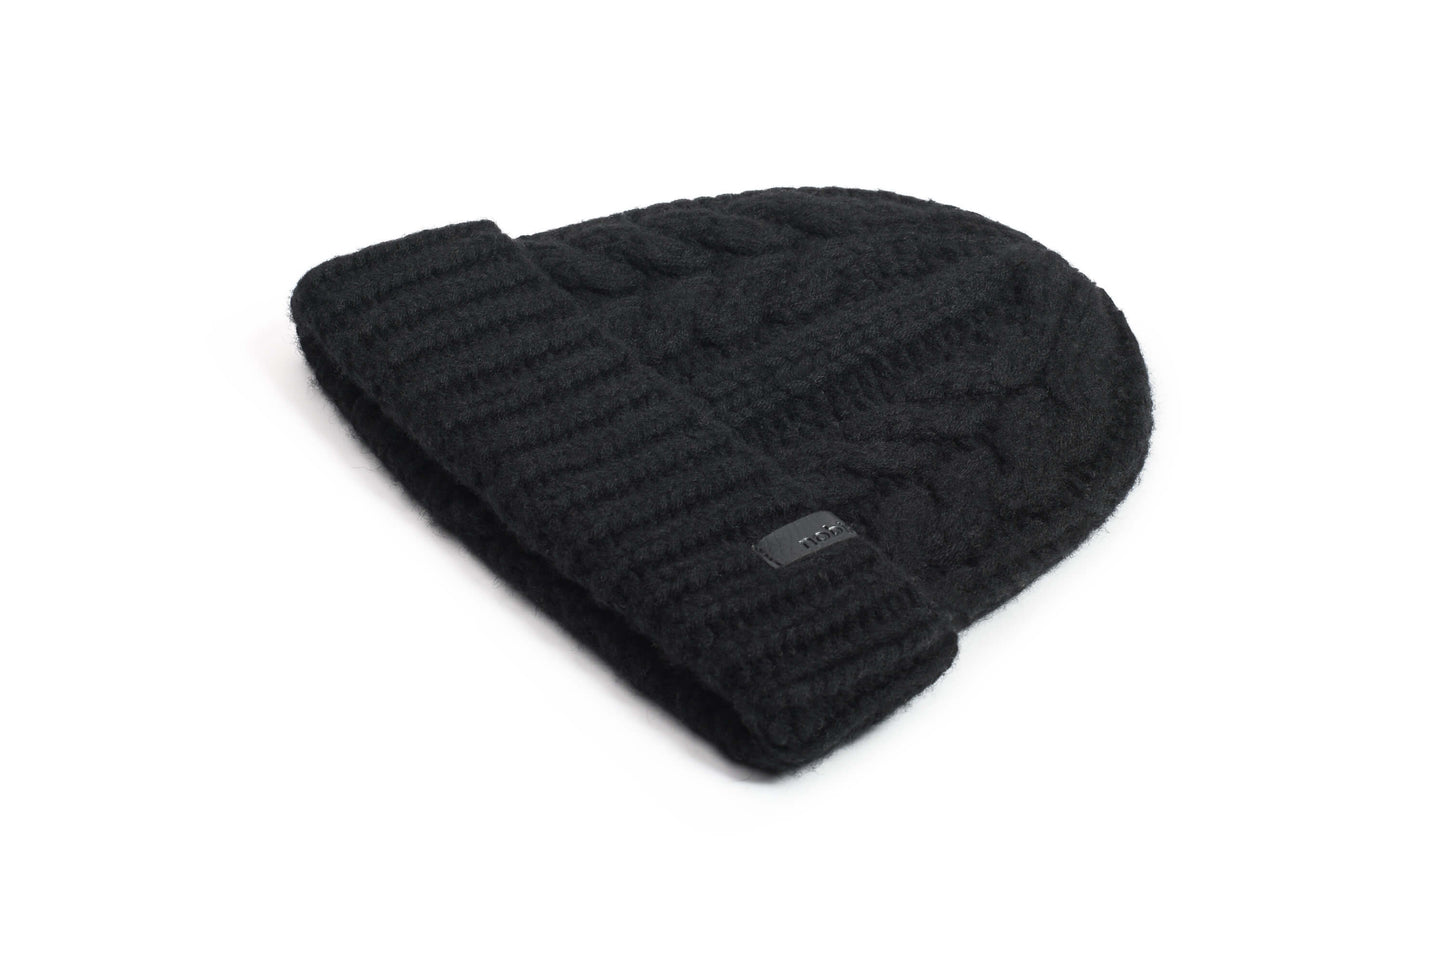 Dew Unisex Cable Knit Beanie in superfine merino wool and cashmere, and nobis leather label at cuff, in Black